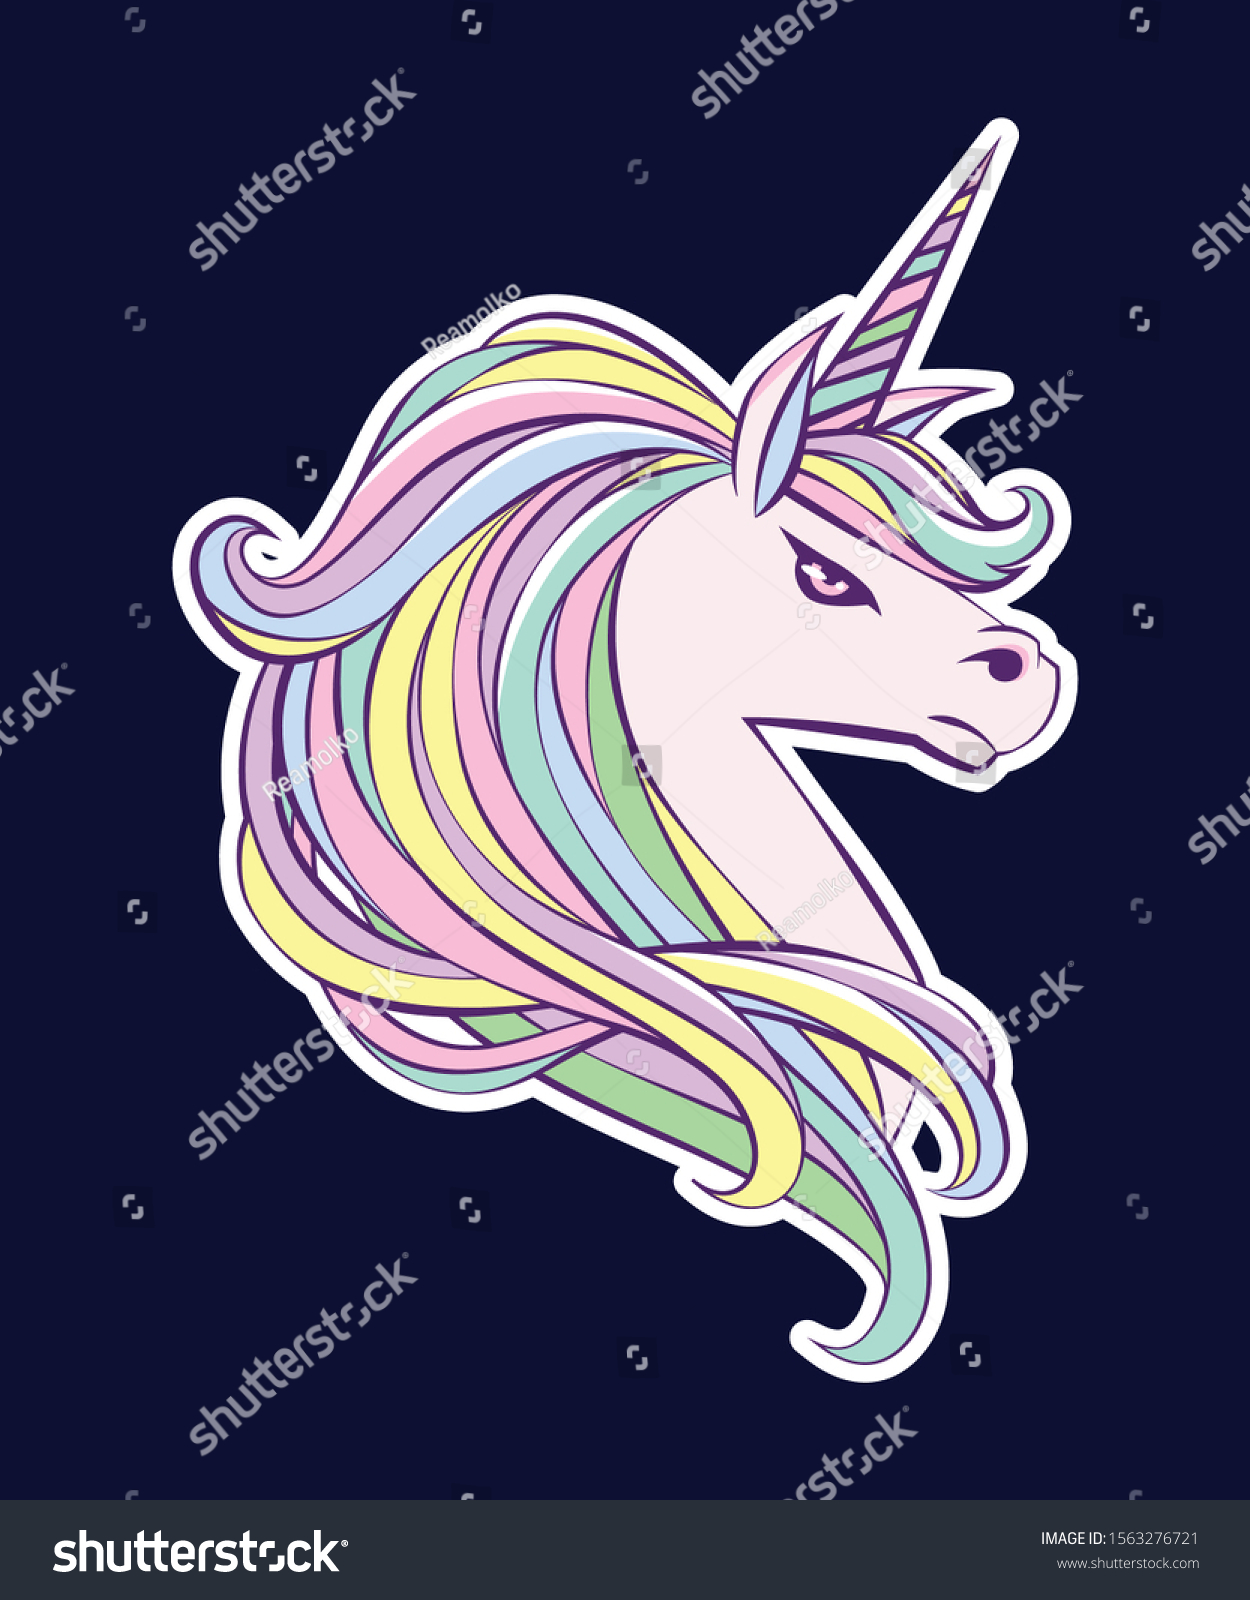 SVG of Cute angry unicorn in cartoon style. Vector design for t-shirt, sticker, etc svg